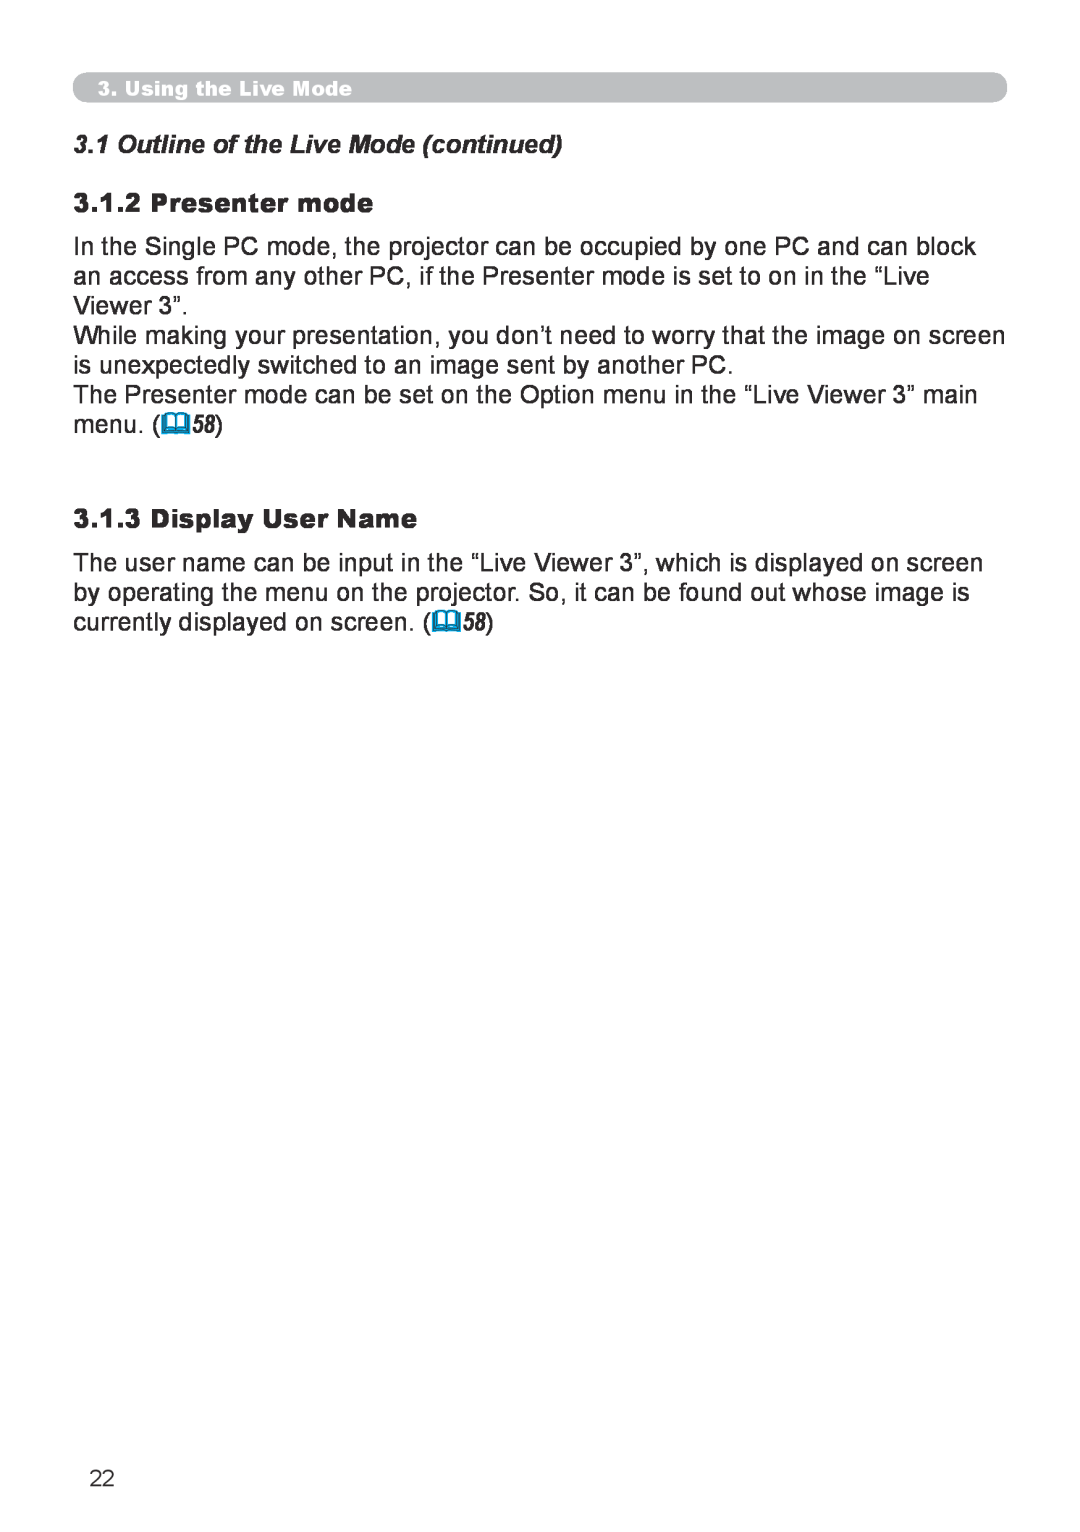 Hitachi CP-X267 user manual Outline of the Live Mode continued, Presenter mode, Display User Name 